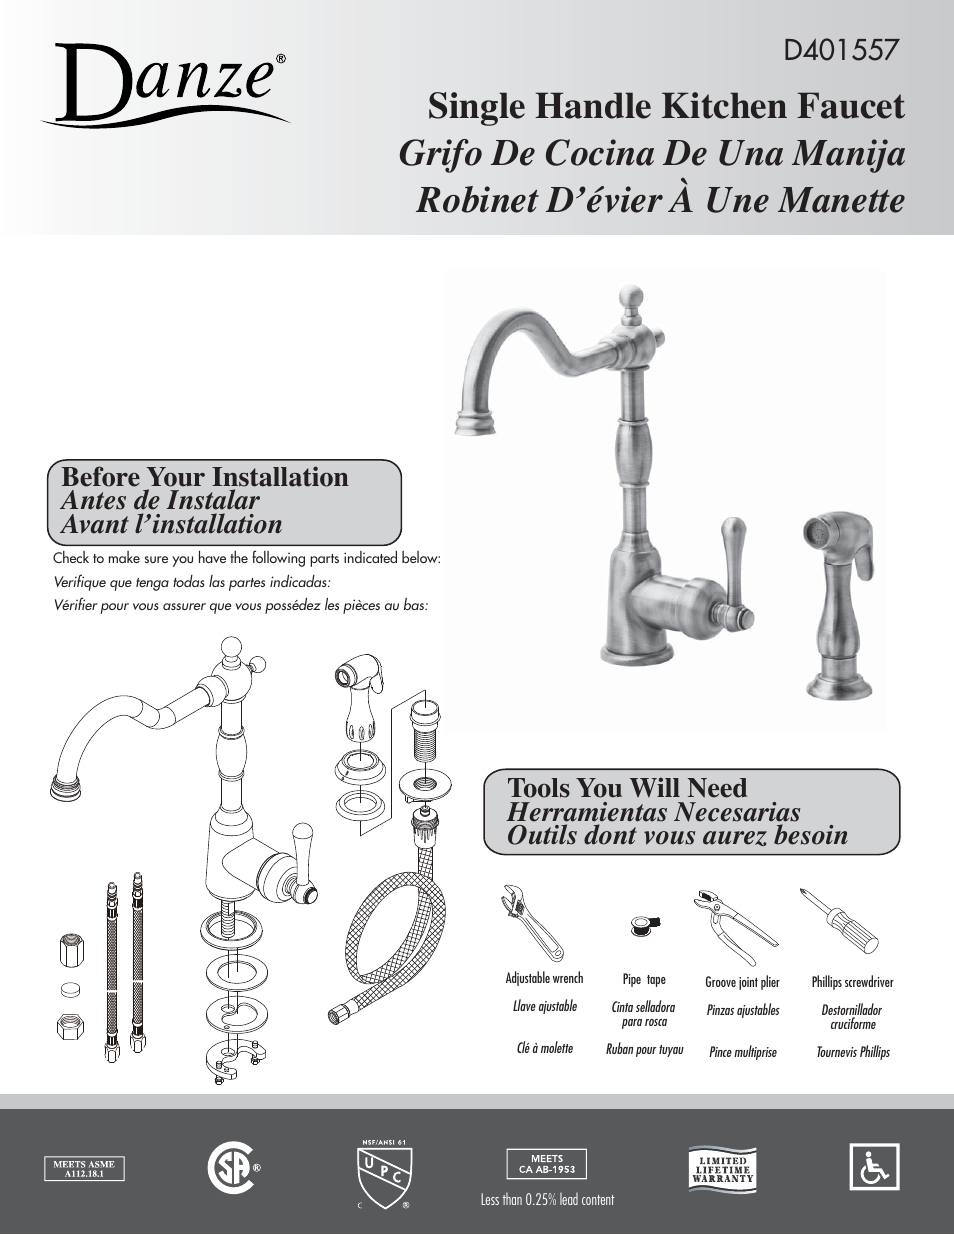 Factory Direct Hardware Danze D401557 Opulence User Manual 4 Pages